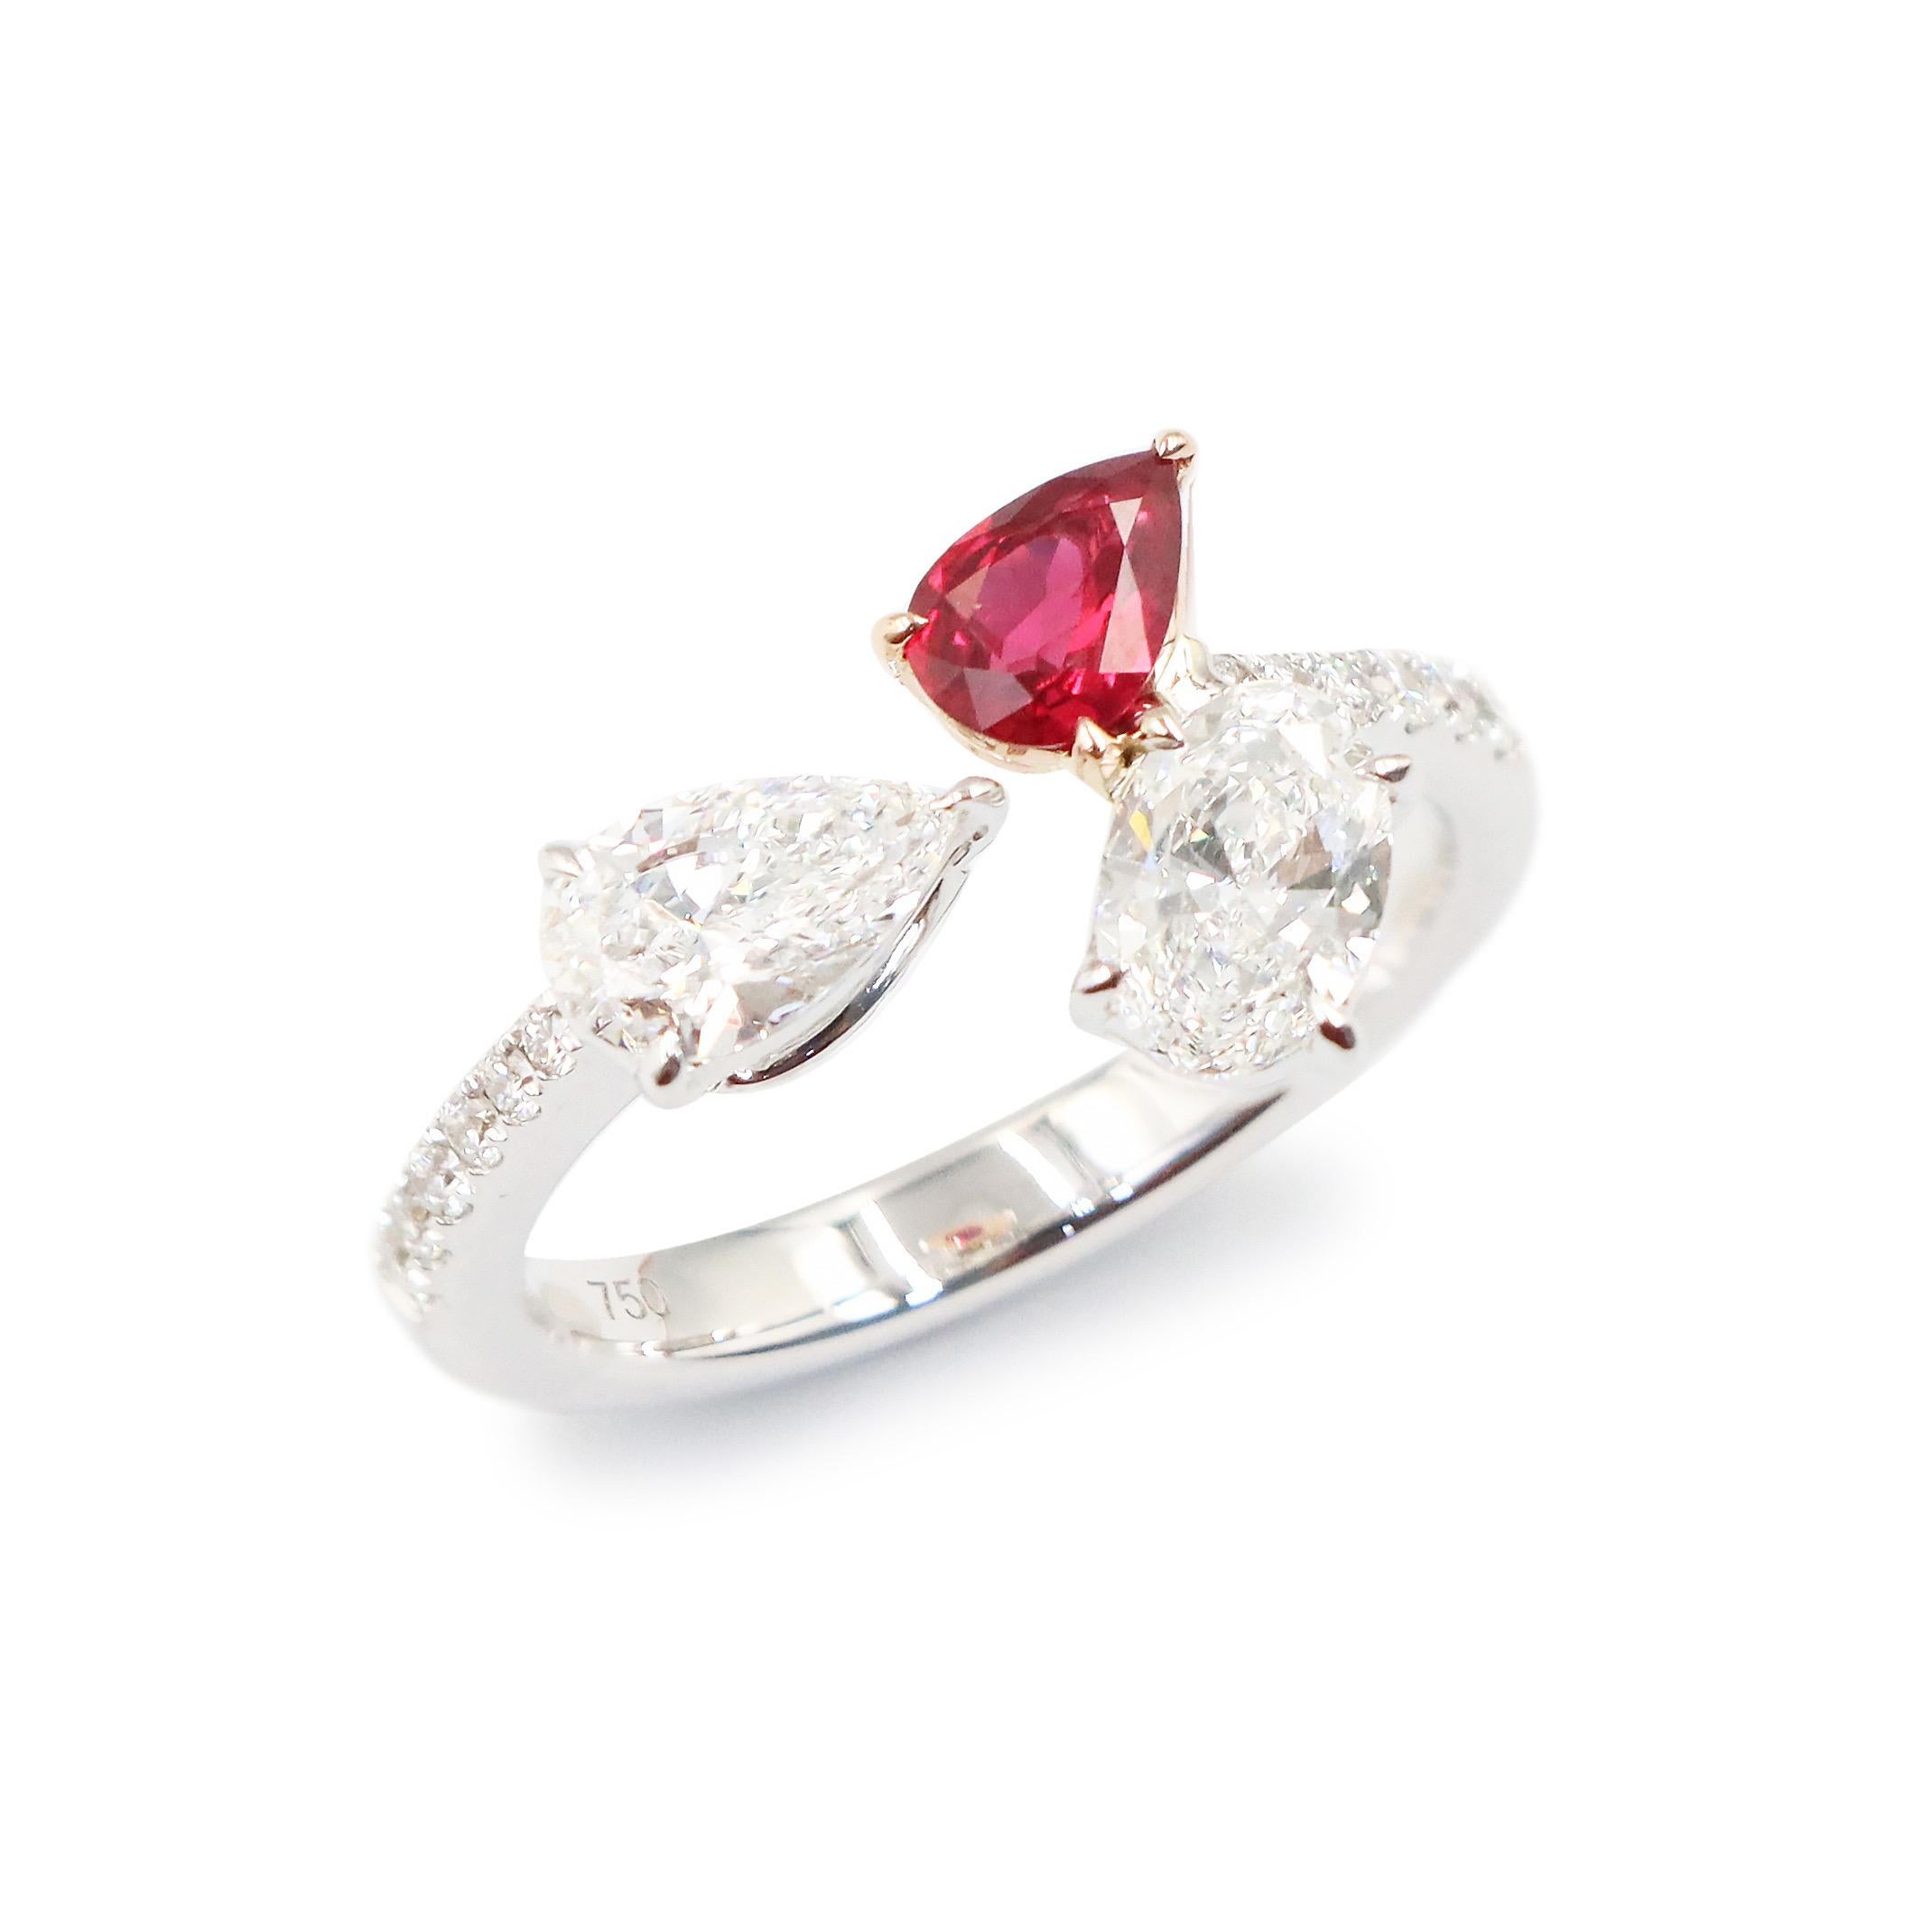 From the vault at Emilio Jewelry located on New York's iconic 5th Ave,
Gia certified .50pt diamond 
Diamond Weight: 1.14 carats
Ruby Stone Weight: 0.41 Breathtaking pigeon blood vivid red color 
Please inquire for additional details. All pieces are